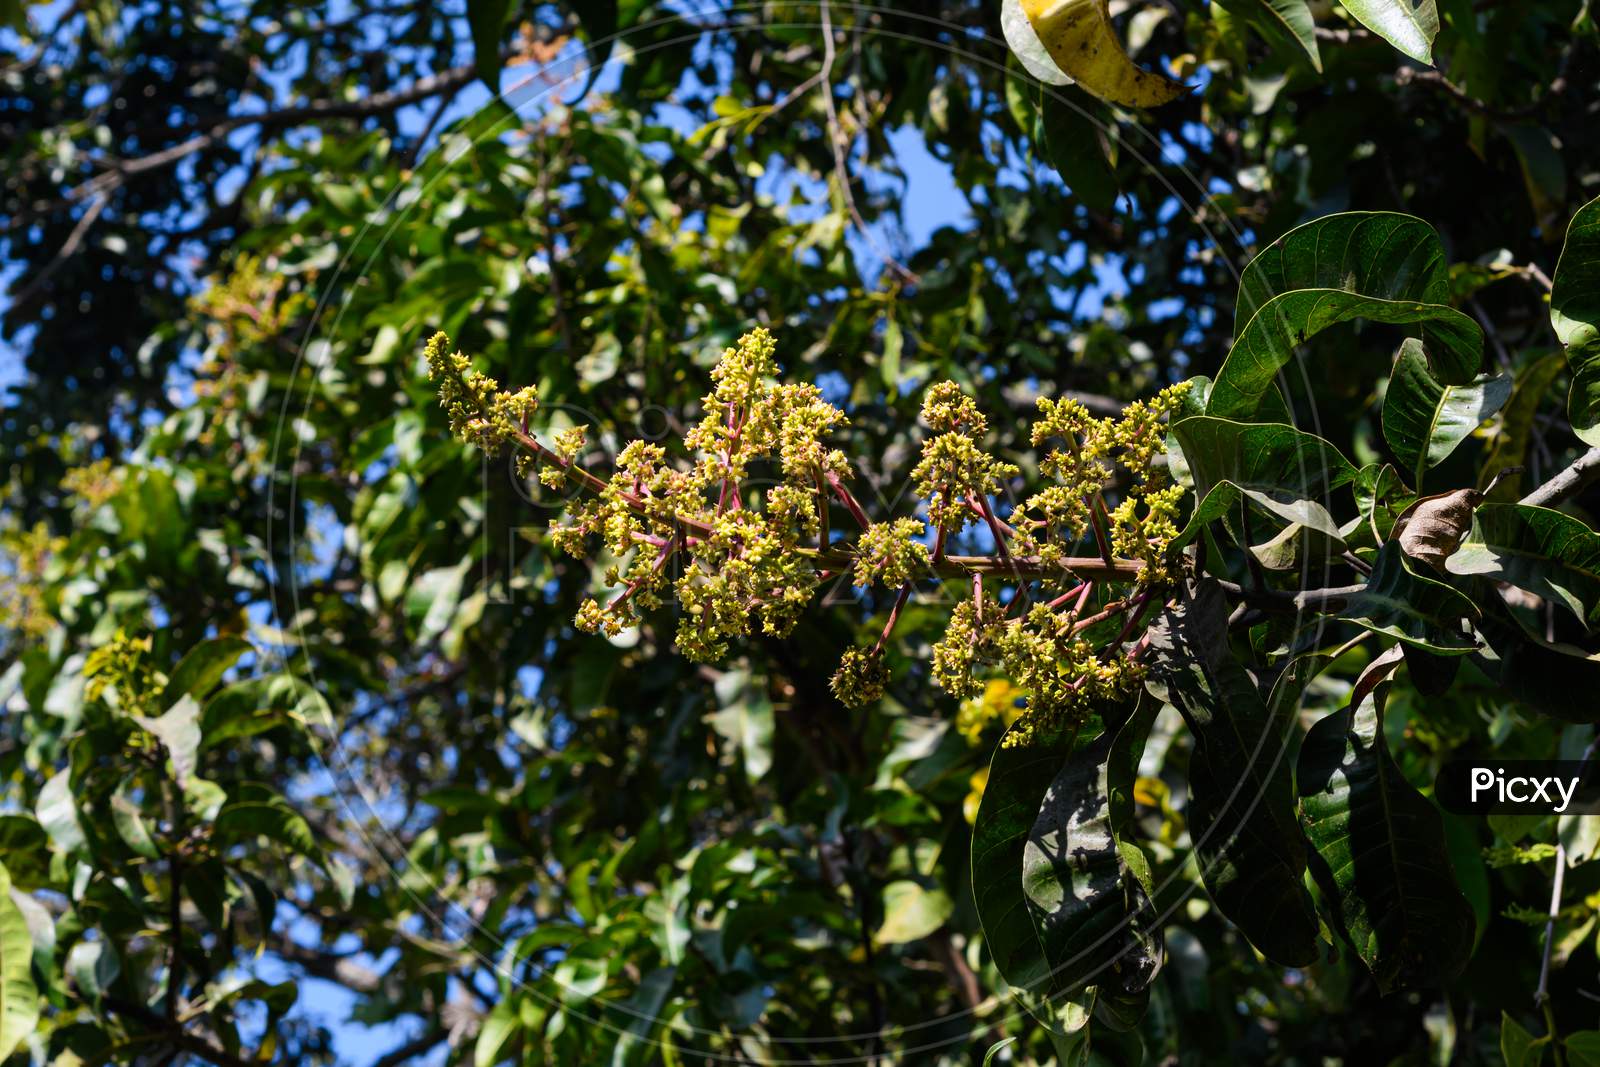 Mangifera Indica Commonly Known As Mango.A Shot Of Fruit Bearing Tree With Small Mangoes And Its Flowers